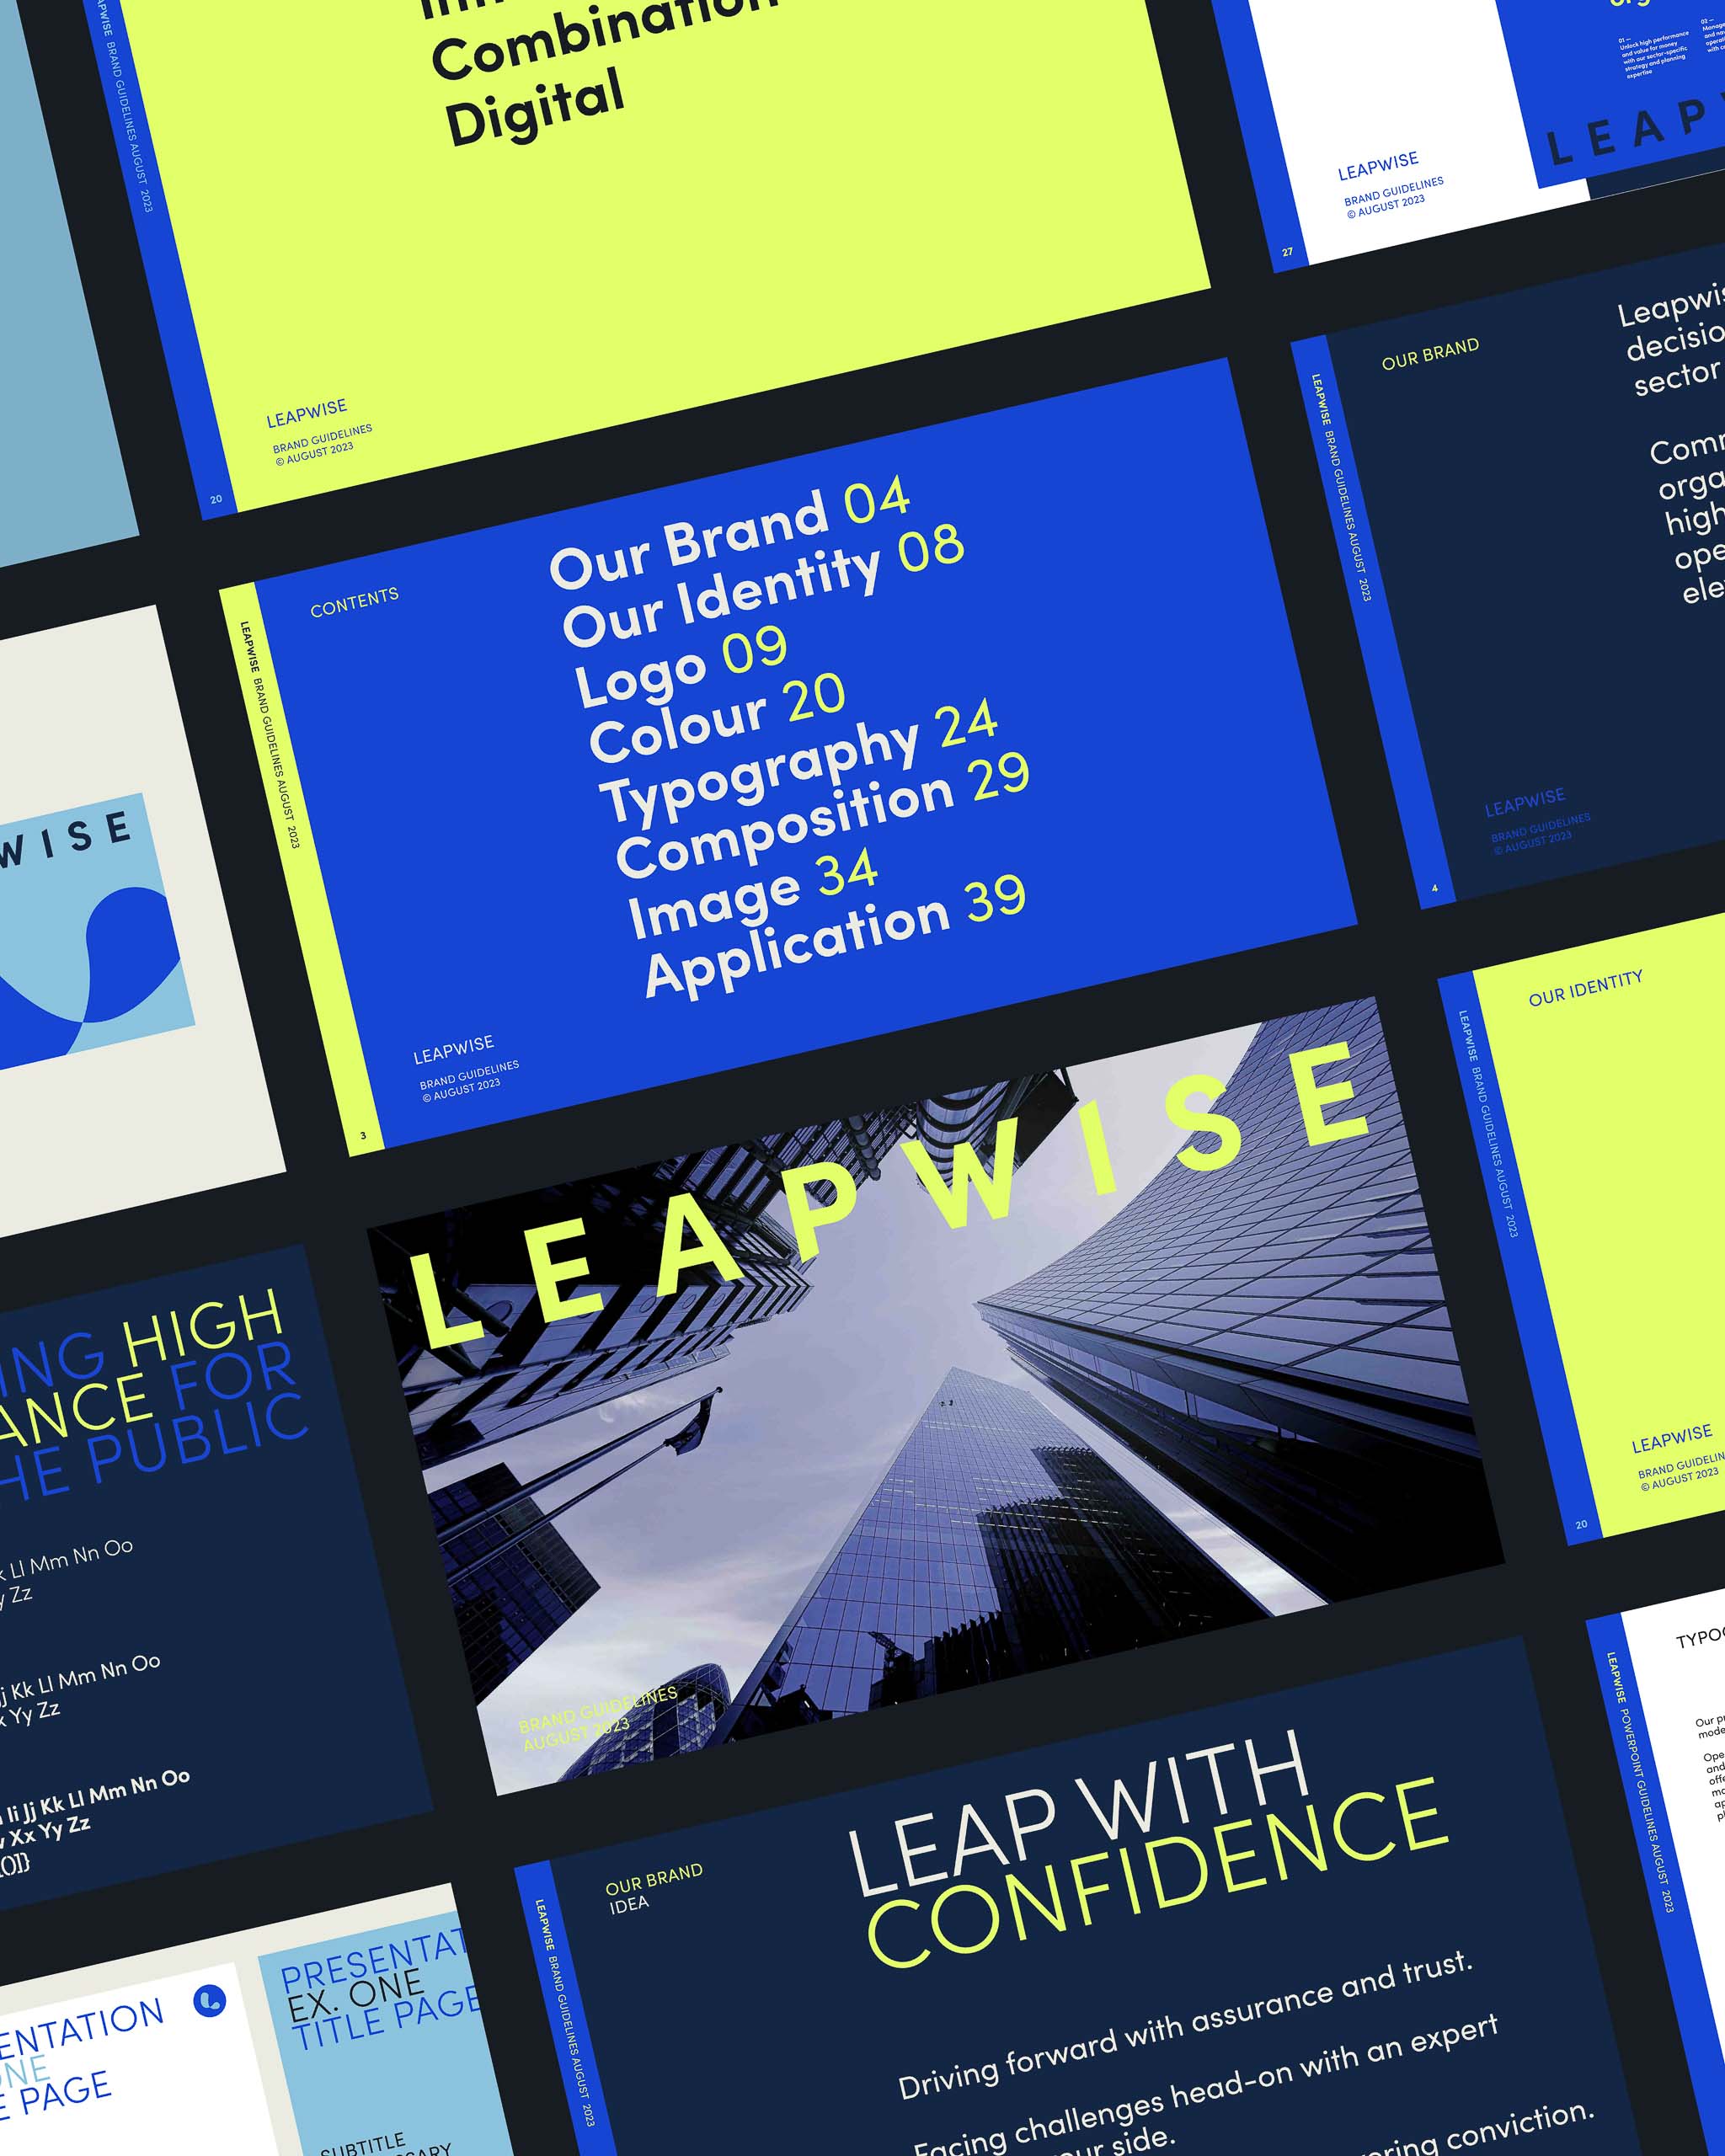 Leapwise